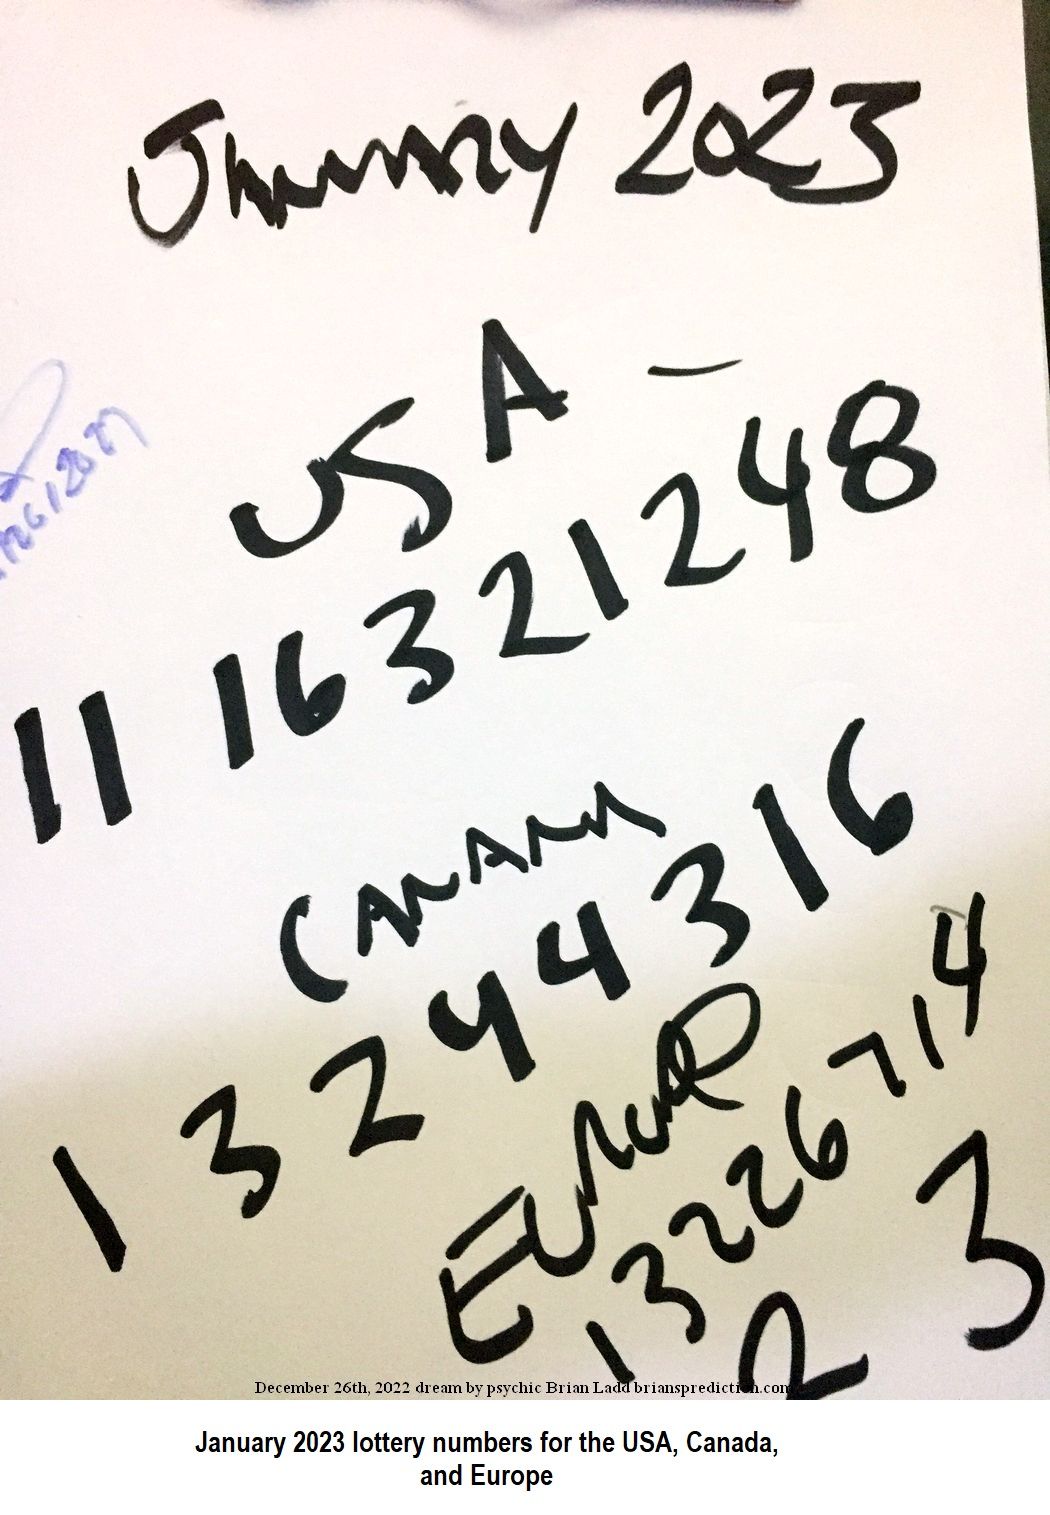 26 December 2022 1 January 2023 lottery numbers for the USA, Canada, and Europe...
January 2023 lottery numbers for the USA, Canada, and Europe.
